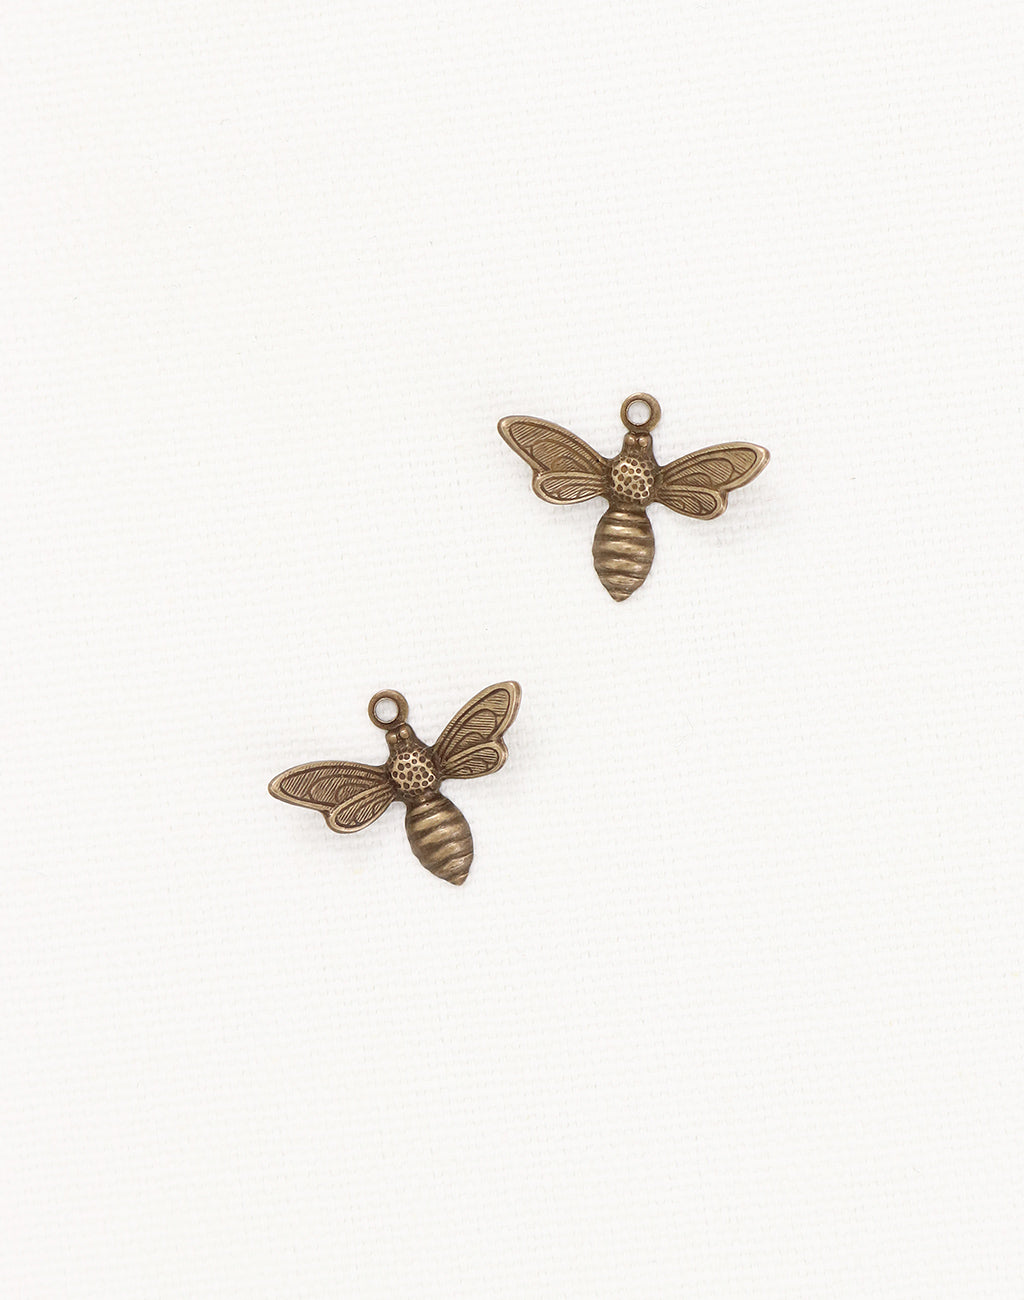 Busy Bee, 13x17mm, (2pcs)